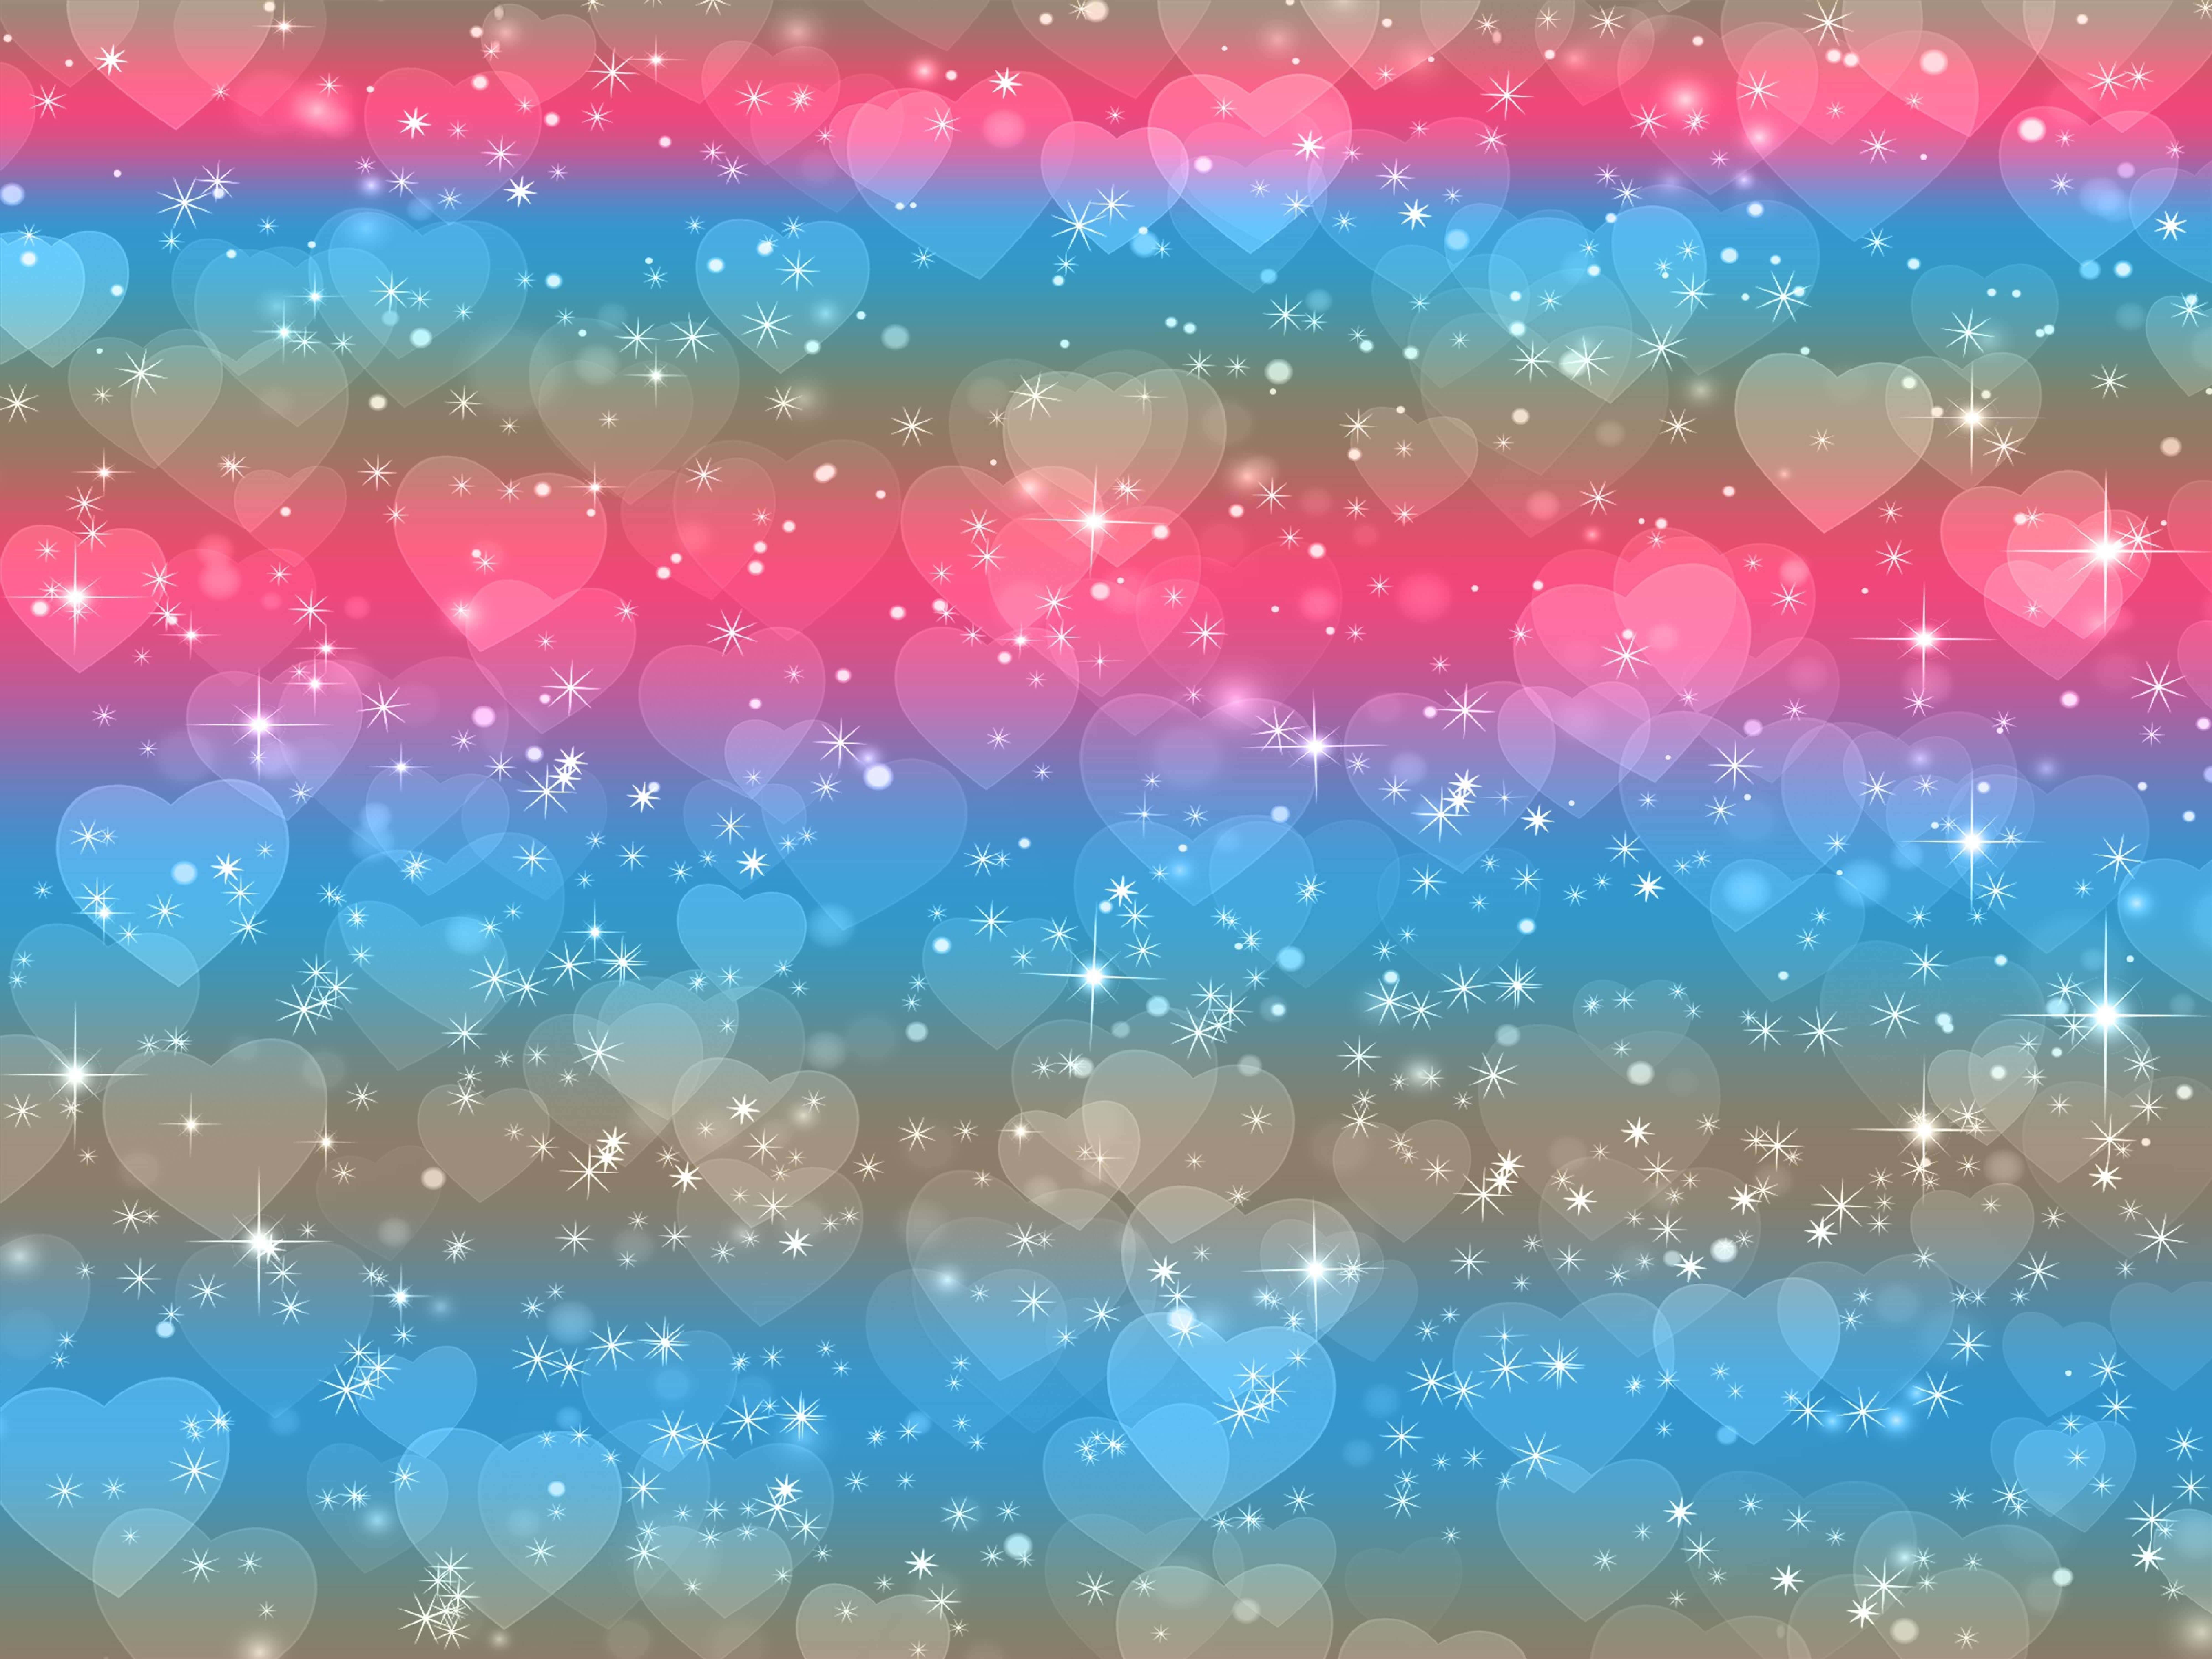 Colorful background with hearts and stars.